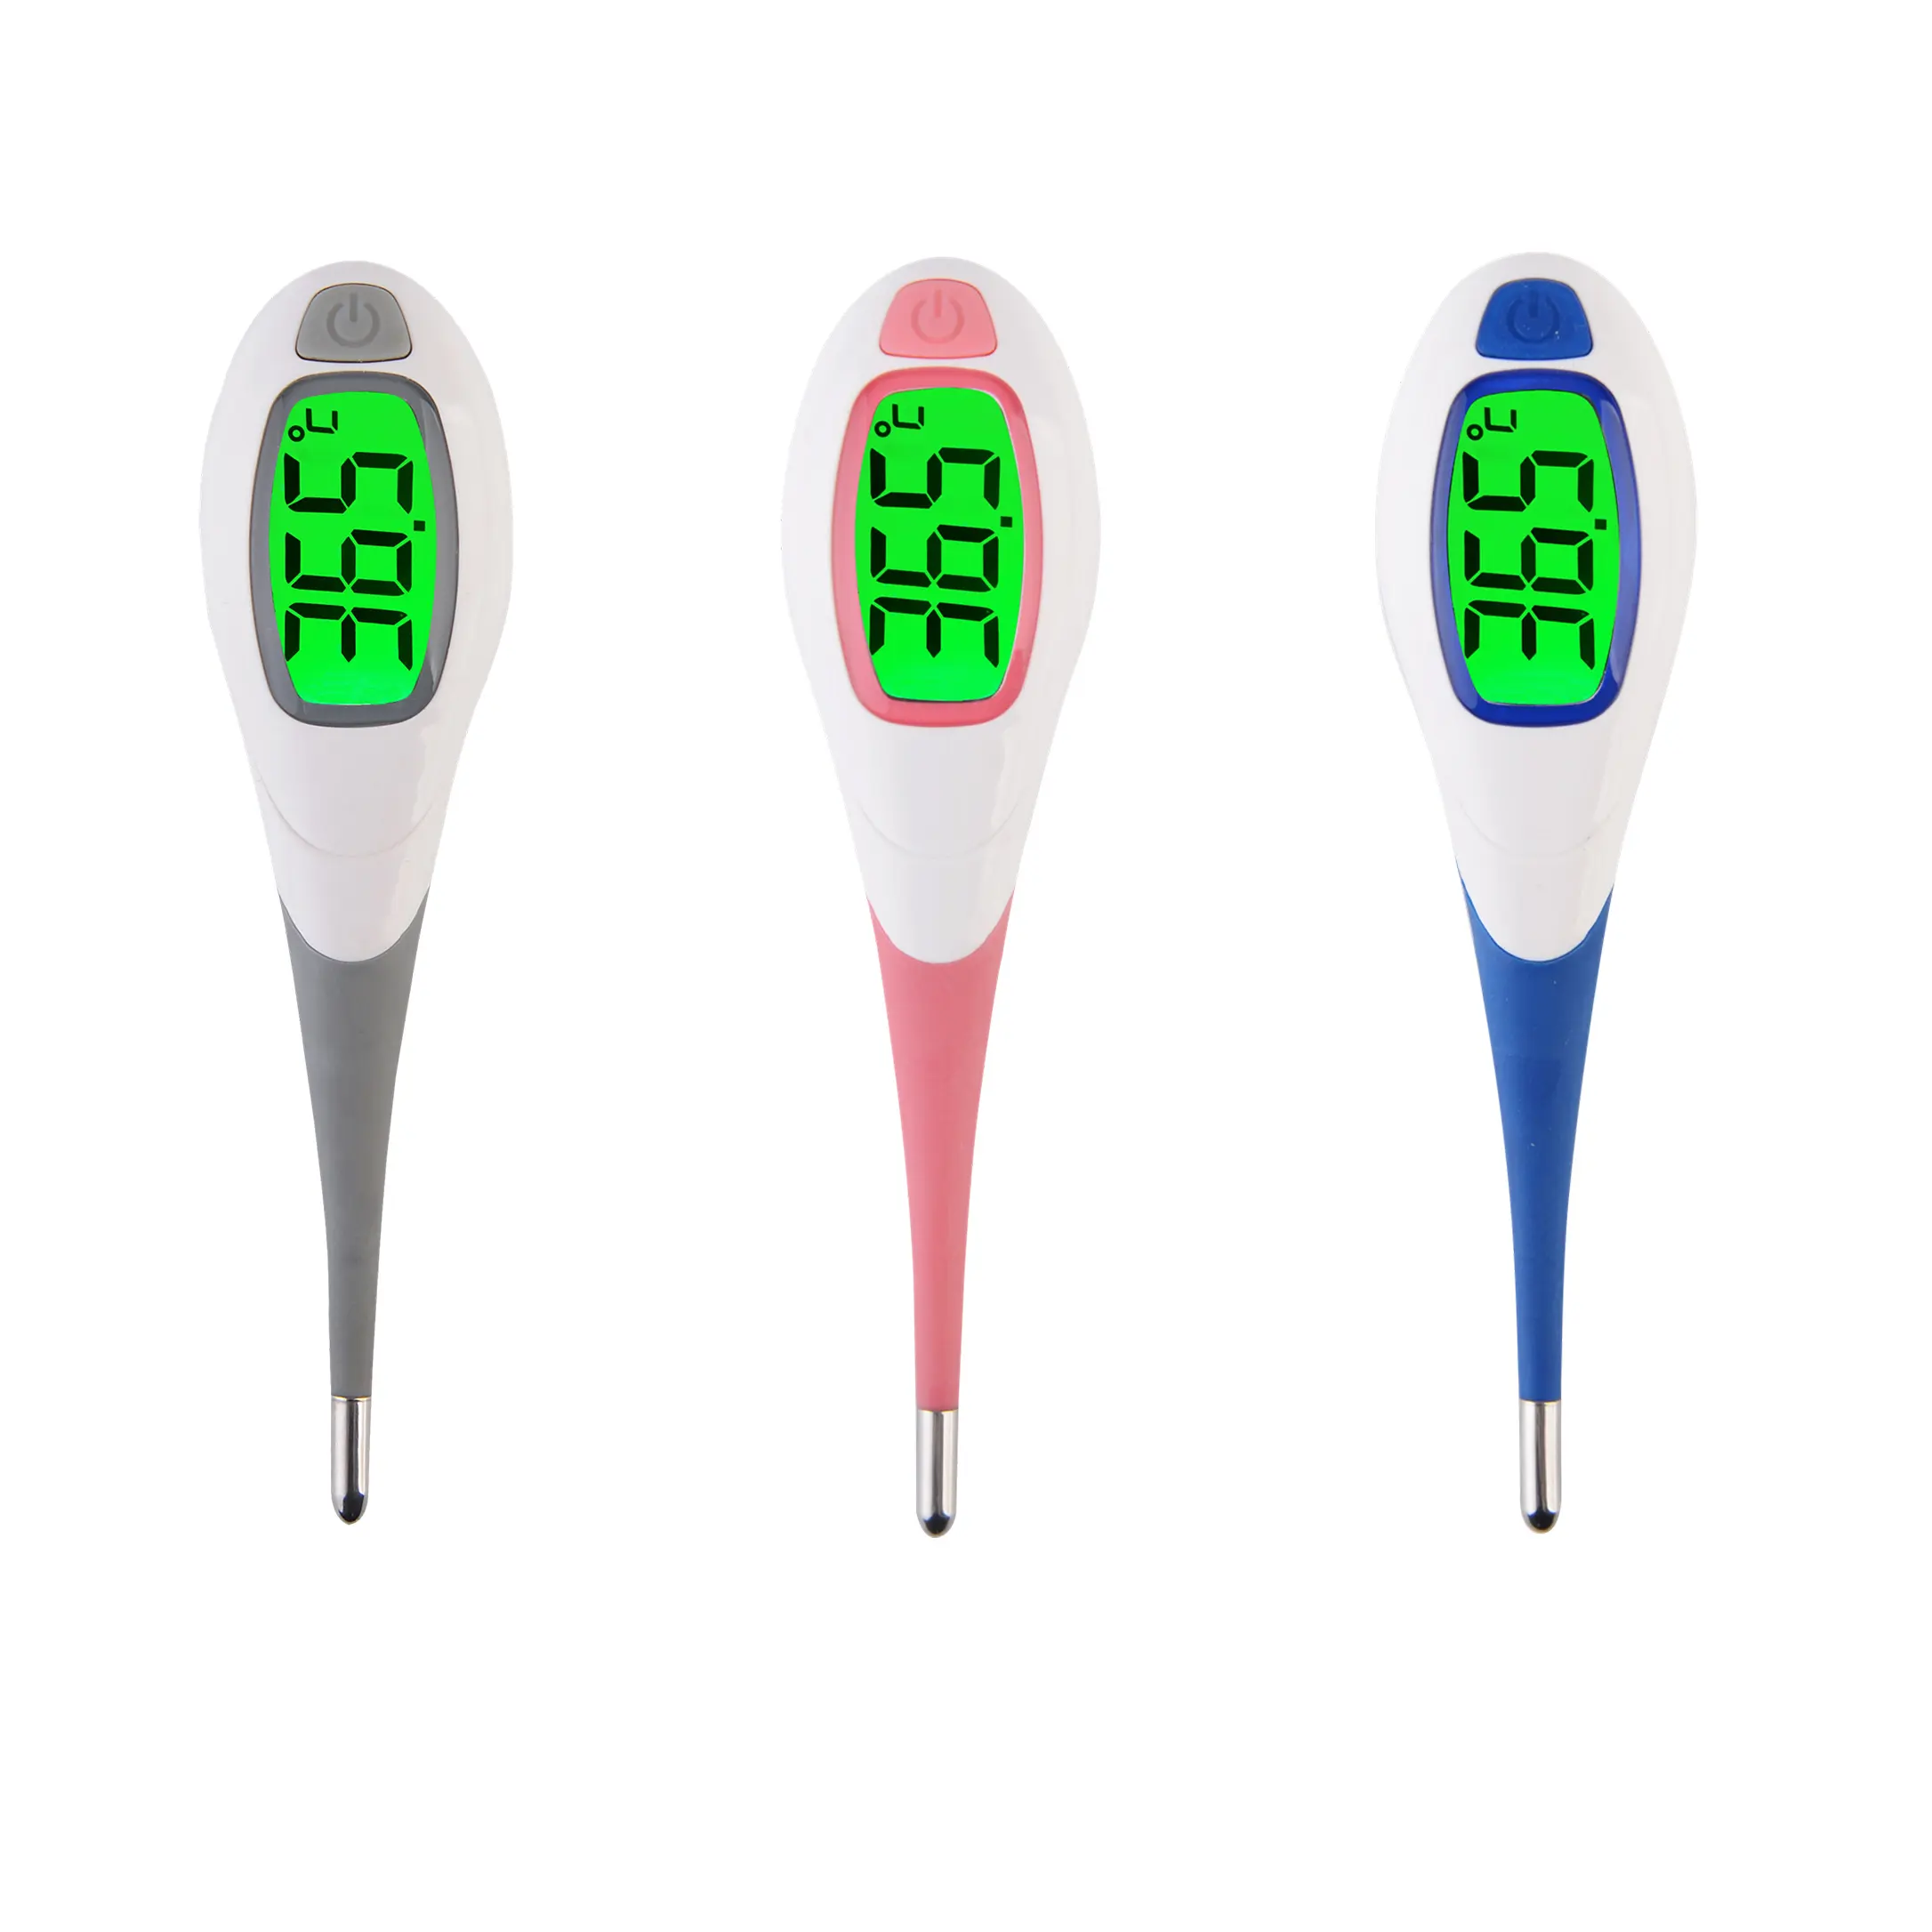 led thermometer digital thermometer price electronic clinical thermometer